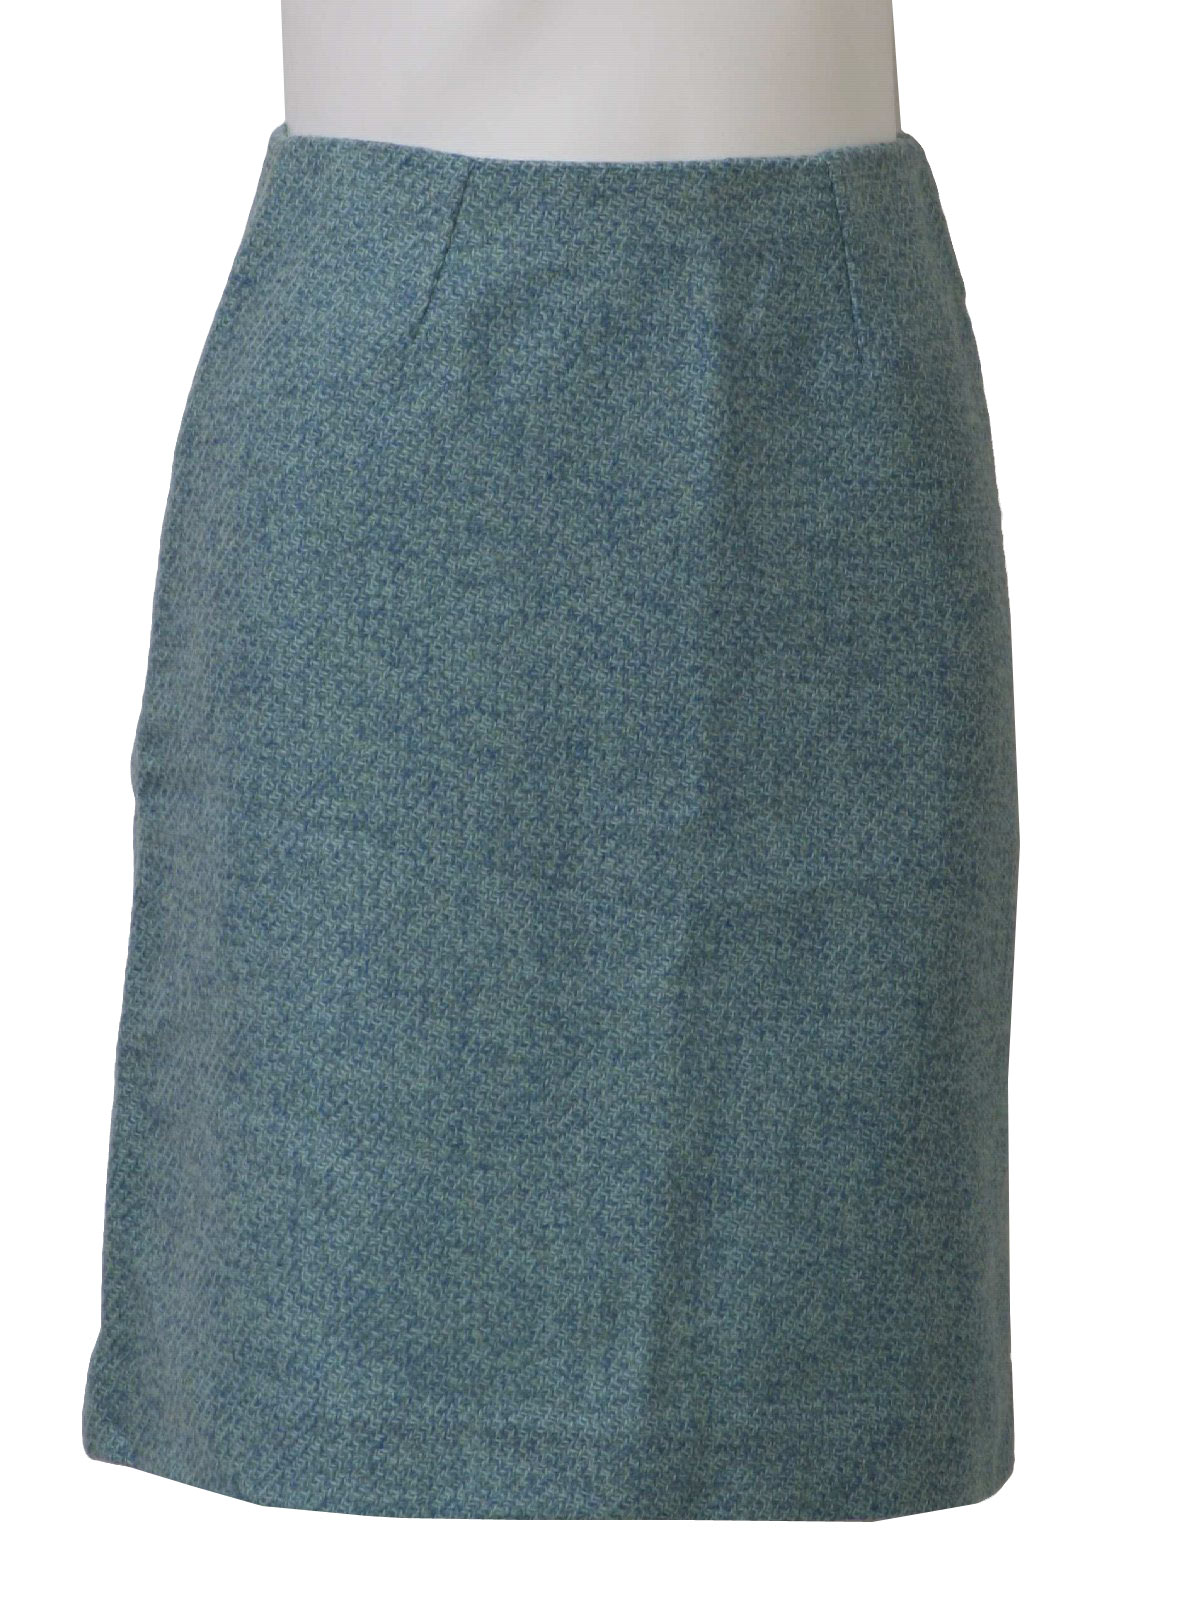 1970s Wool Skirt: 70s -No Label- Womens wool, dart fitted, mid-length ...